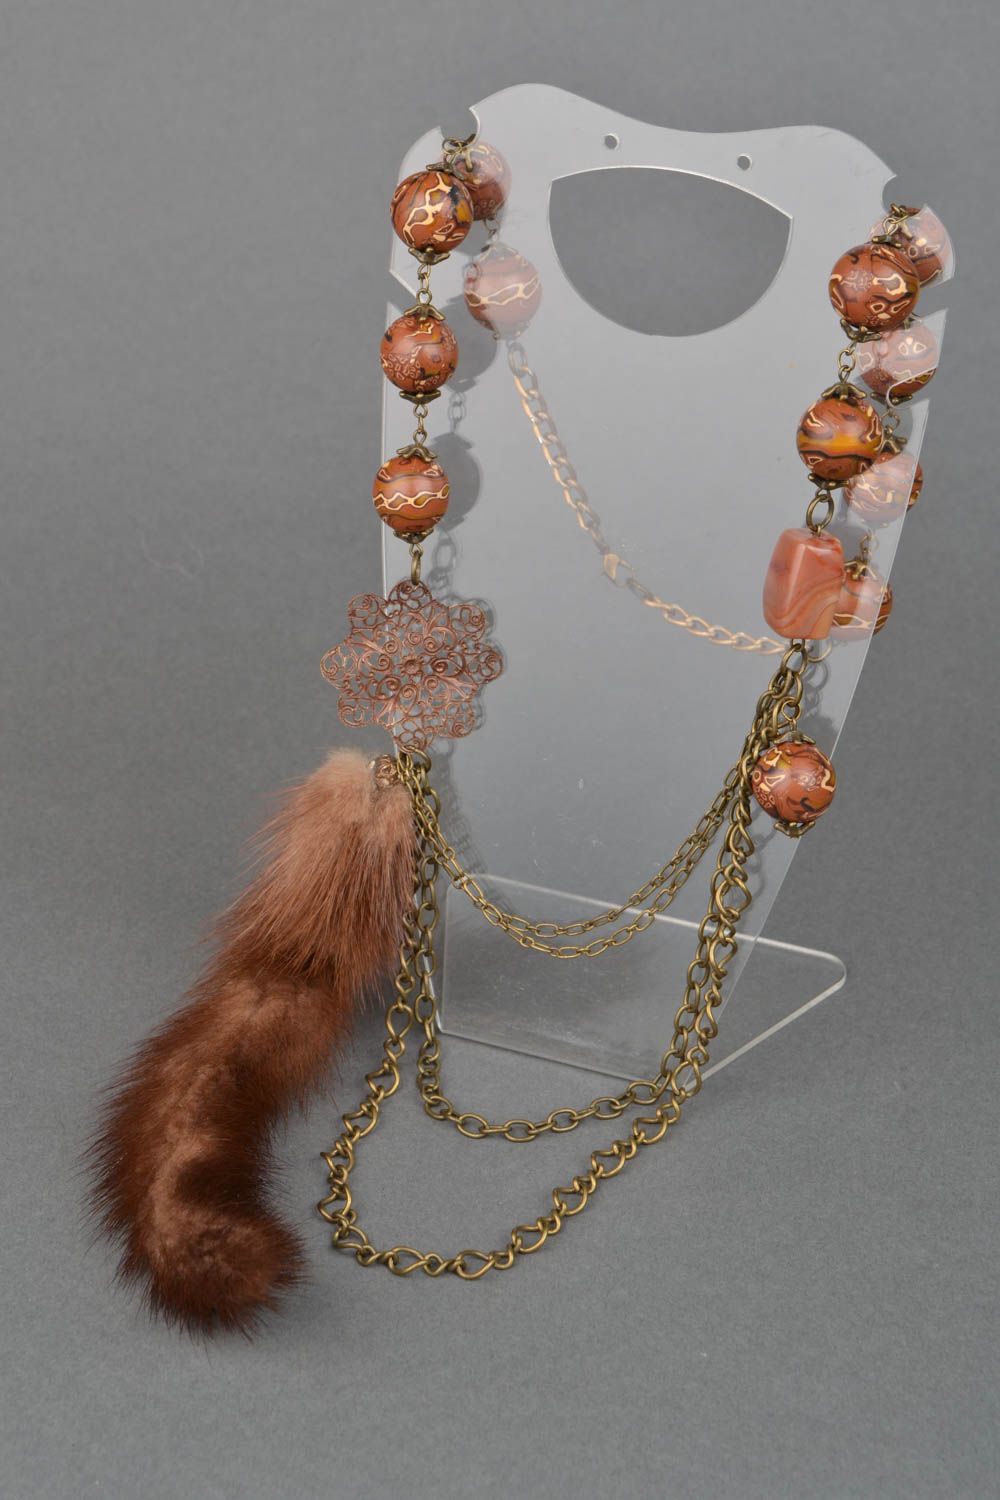 Bead necklace with natural stone and mink fur photo 1